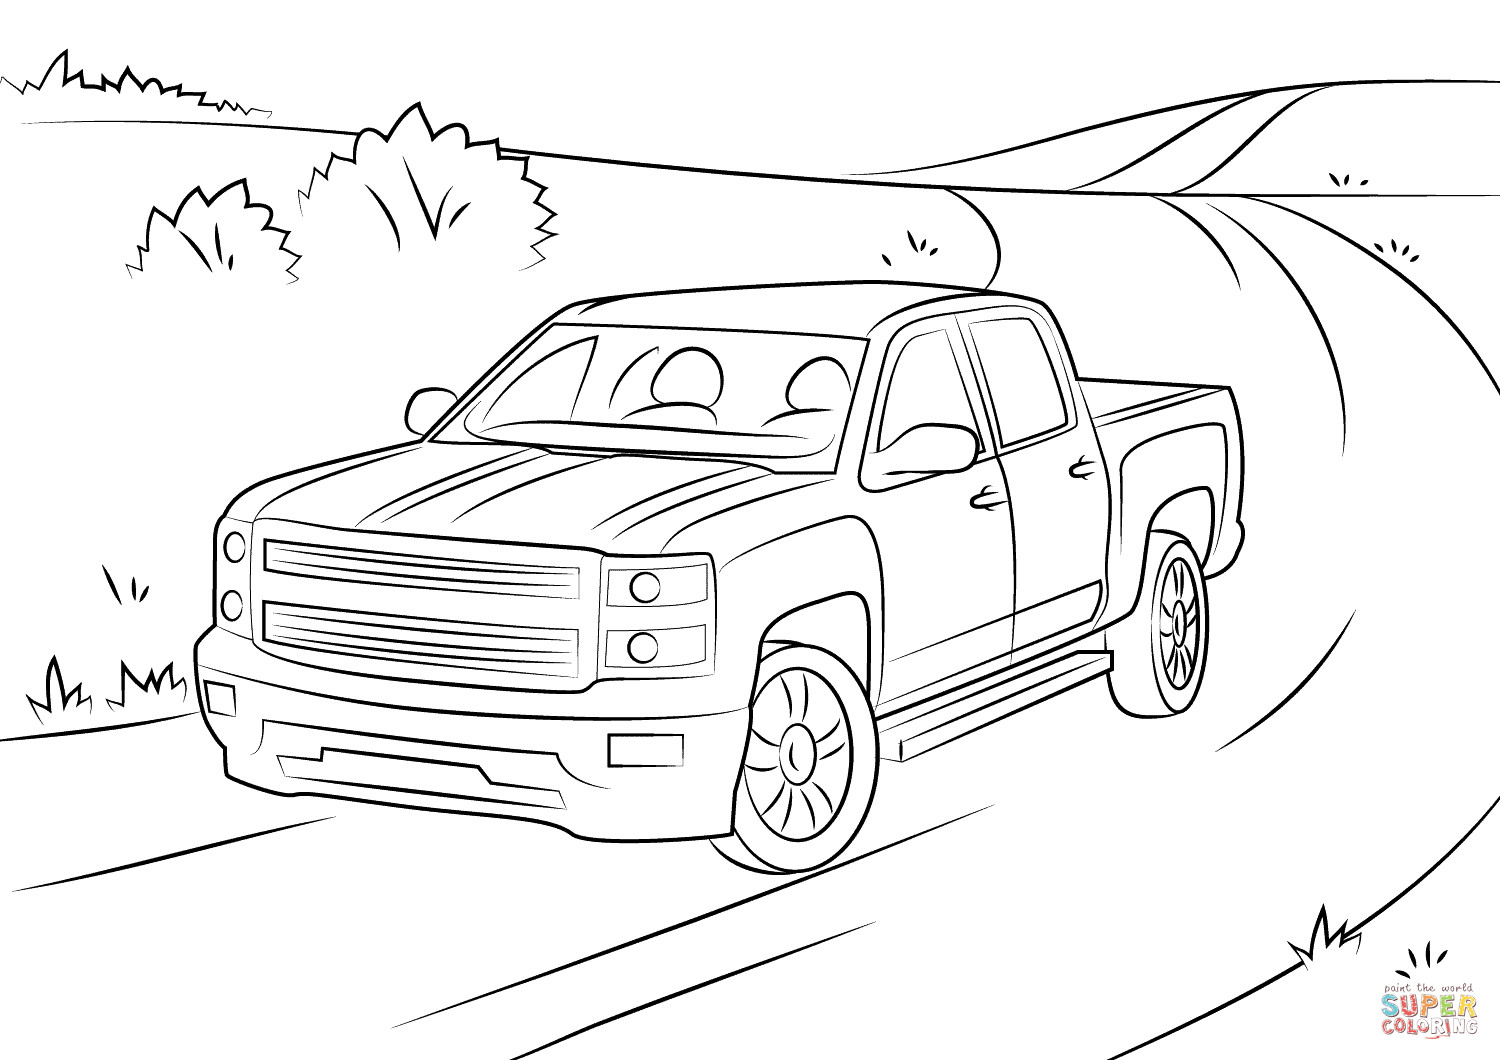 Chevy Girls And Boys Coloring Pages
 Chevrolet Silverado coloring page